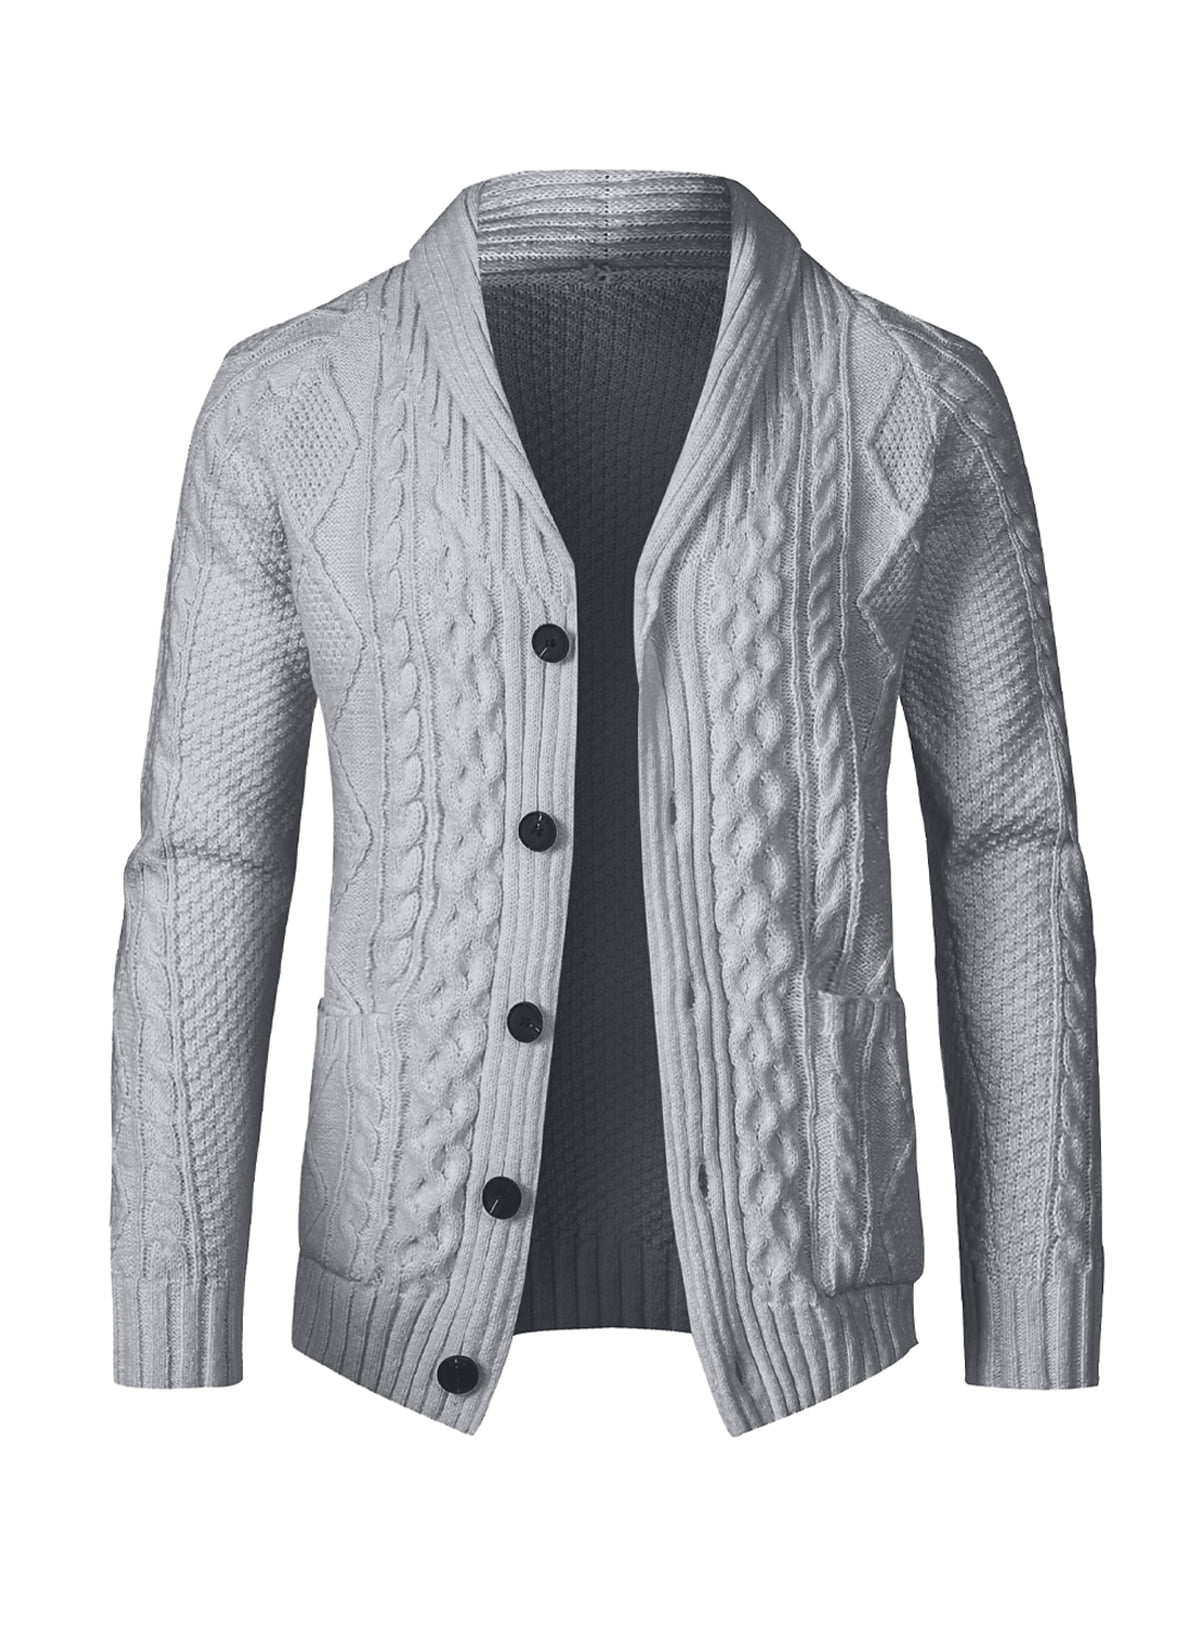 JMIERR Men Cardigan Sweater Long Sleeve Shawl Collar Button Down Cable ...